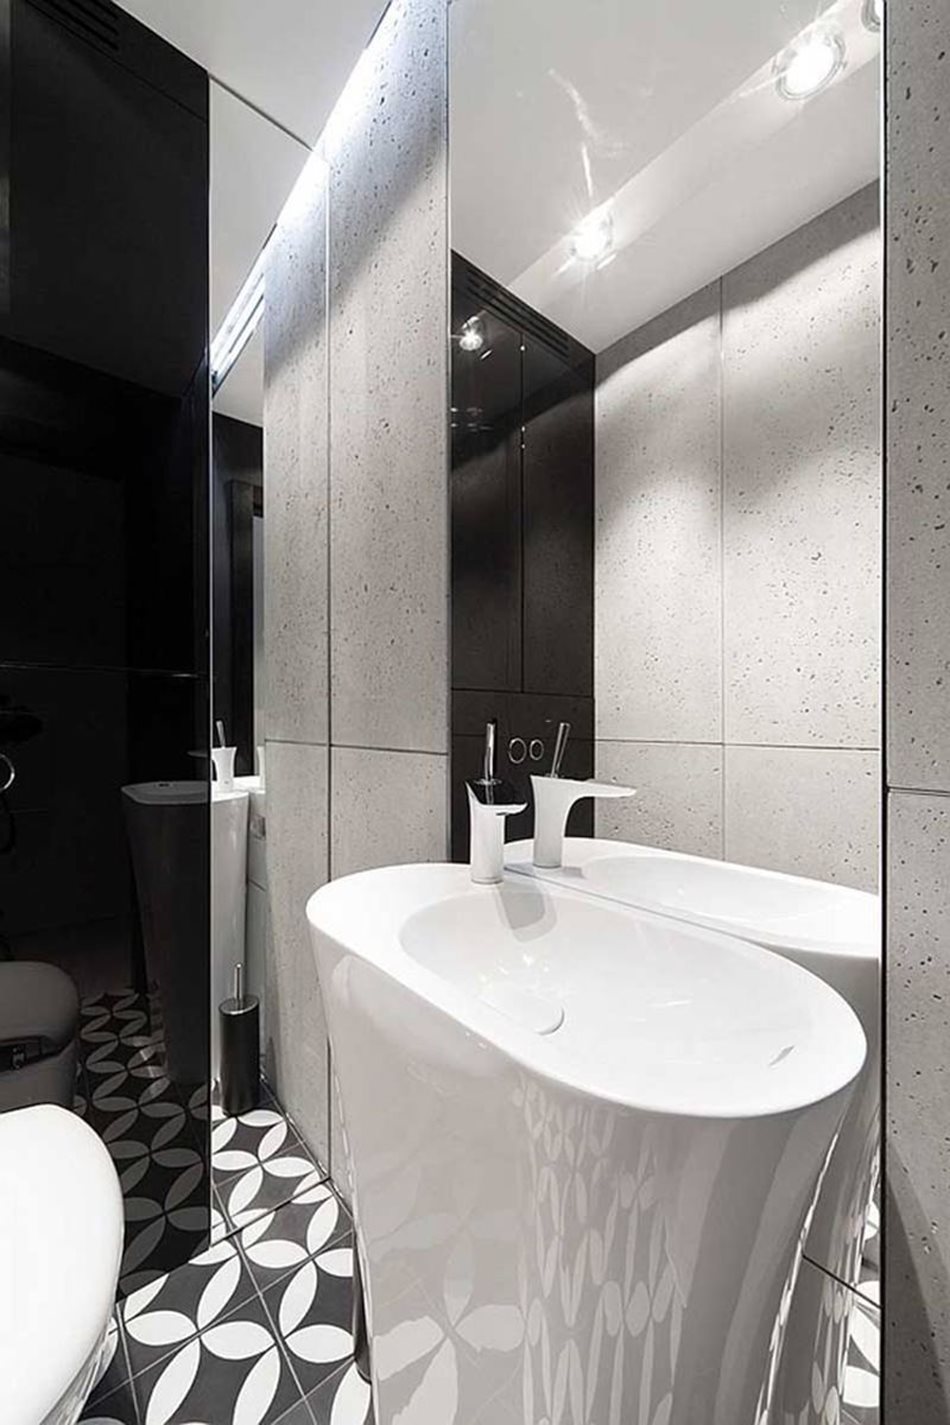 Apartment interior design in black and white colors - In a small bathroom, the space is enlarged with the help of mirrors and reflecting